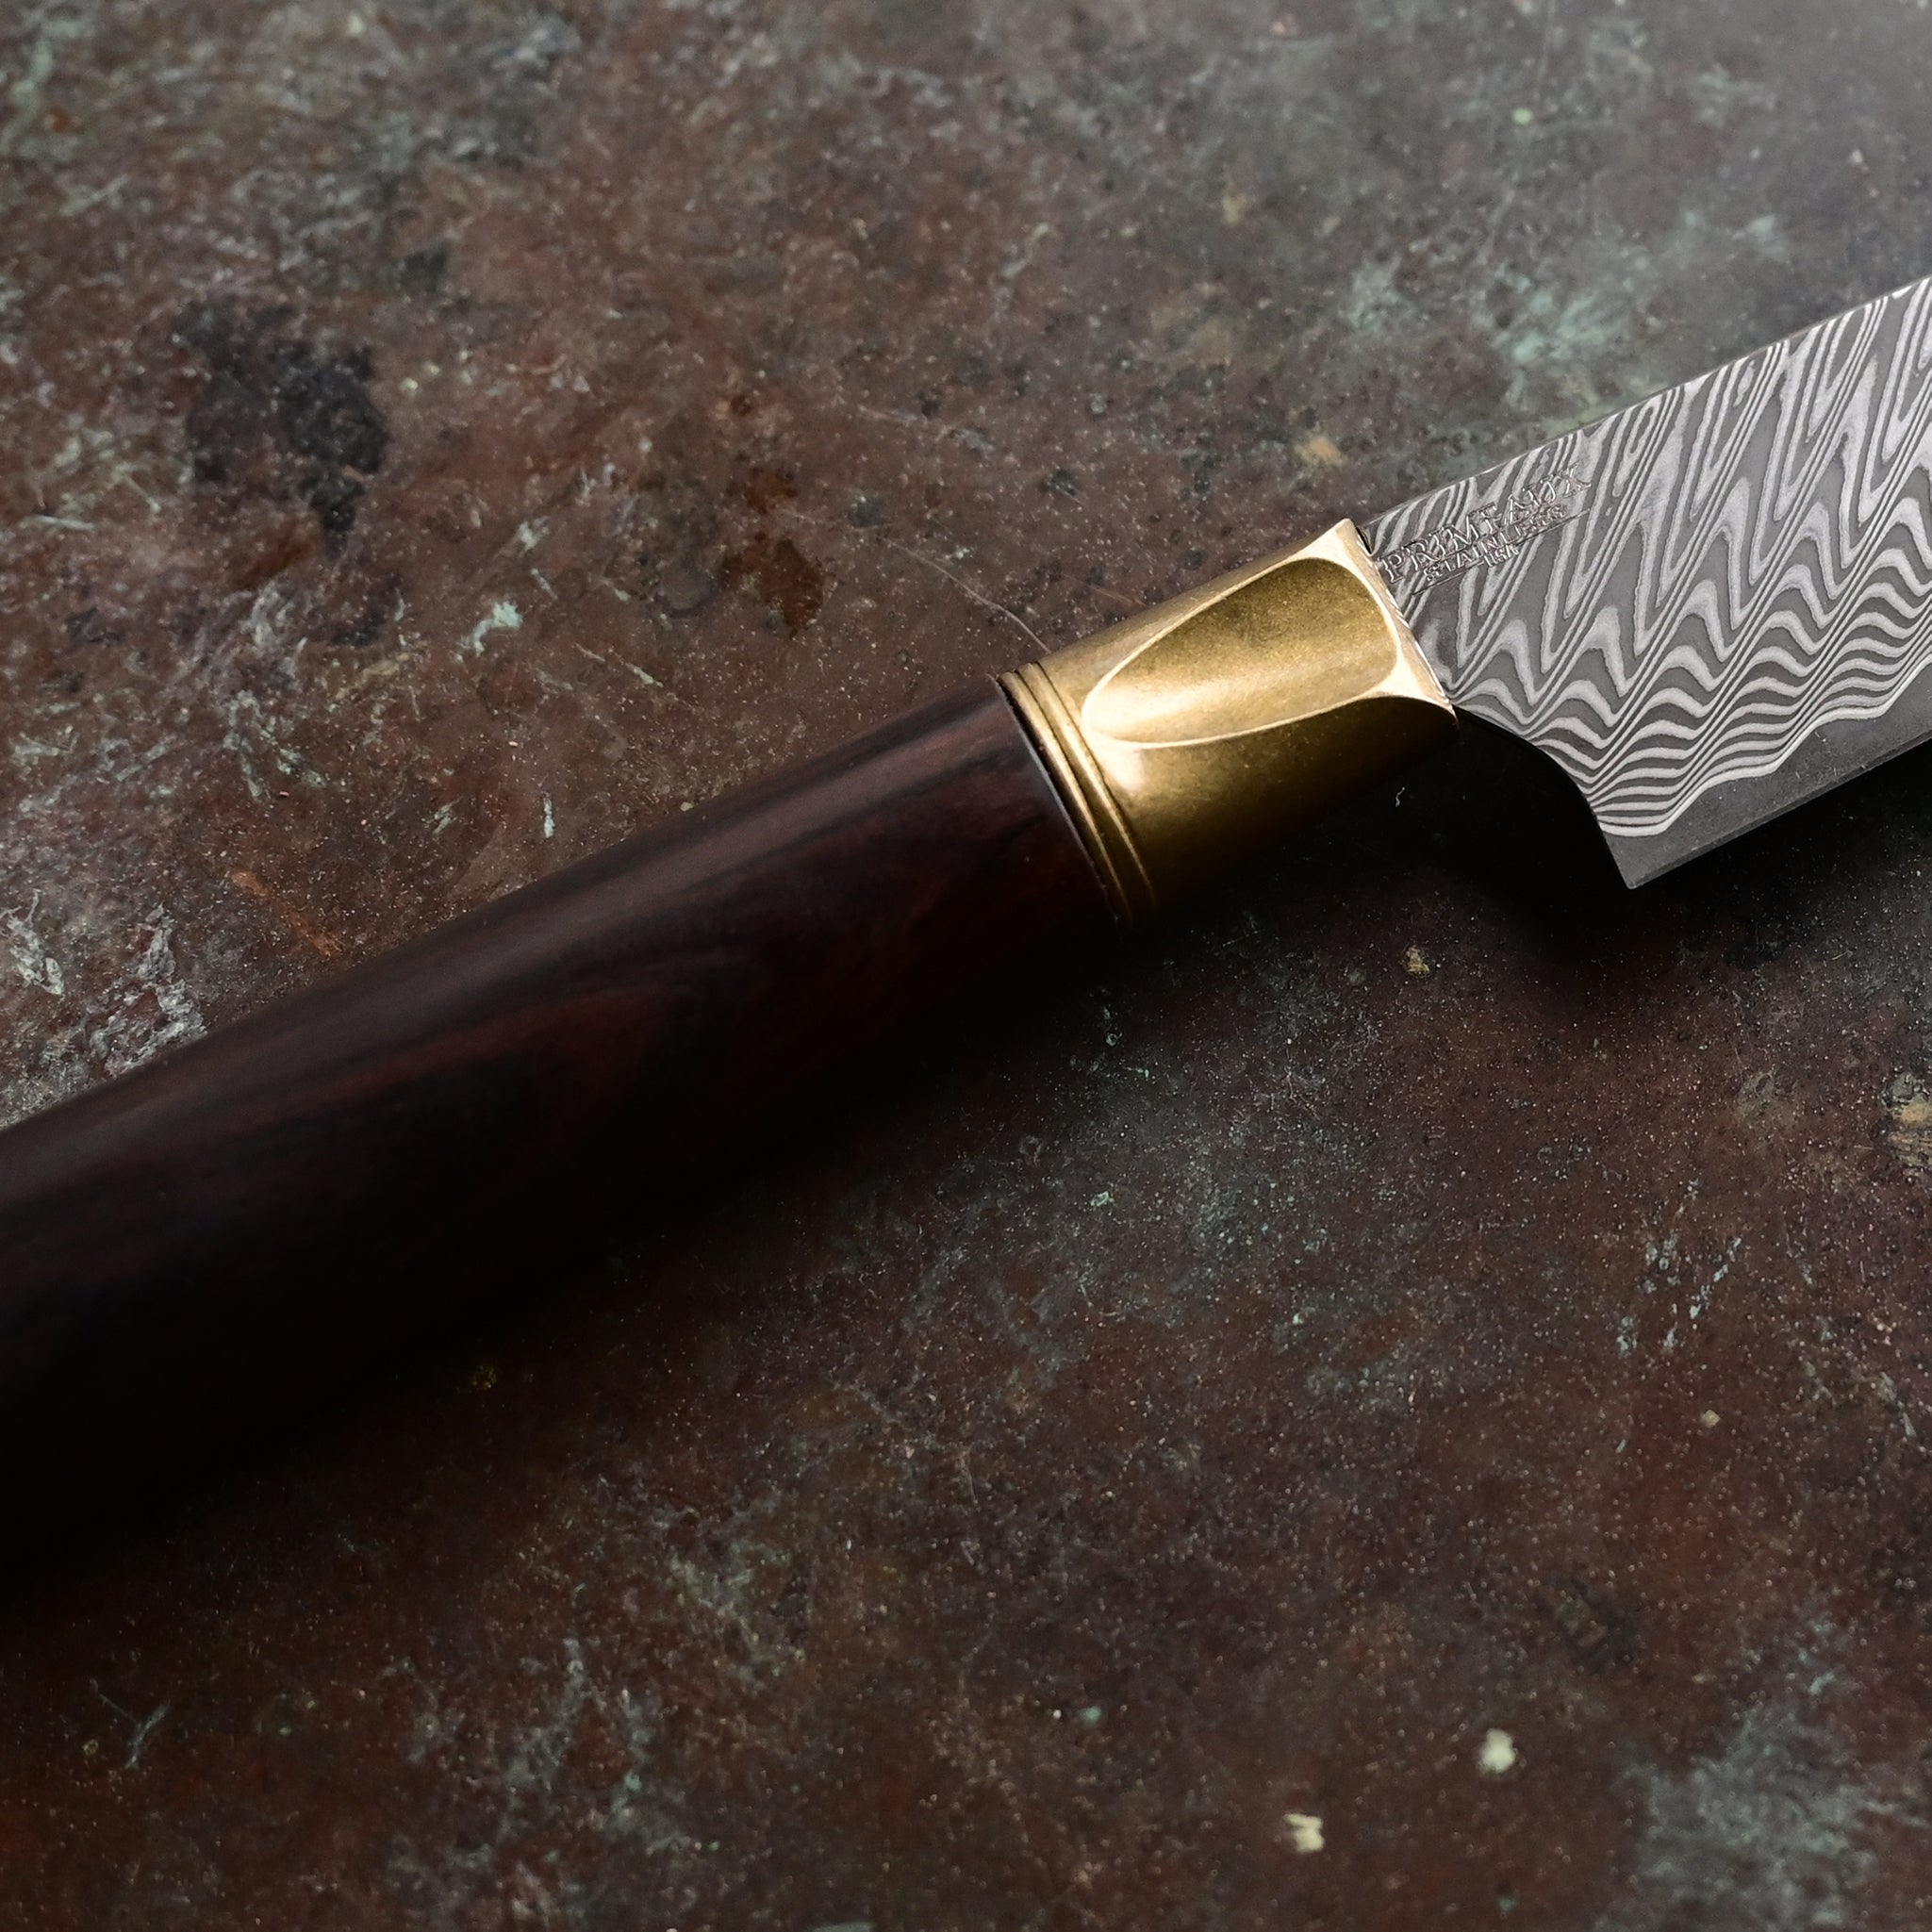 A one-of-a-kind 6.5" Meridian petty knife with a sawtooth Damascus blade, natural bronze bolster, and a straight-grained Turkish walnut handle in rich brown tones, hand-forged by John Phillips